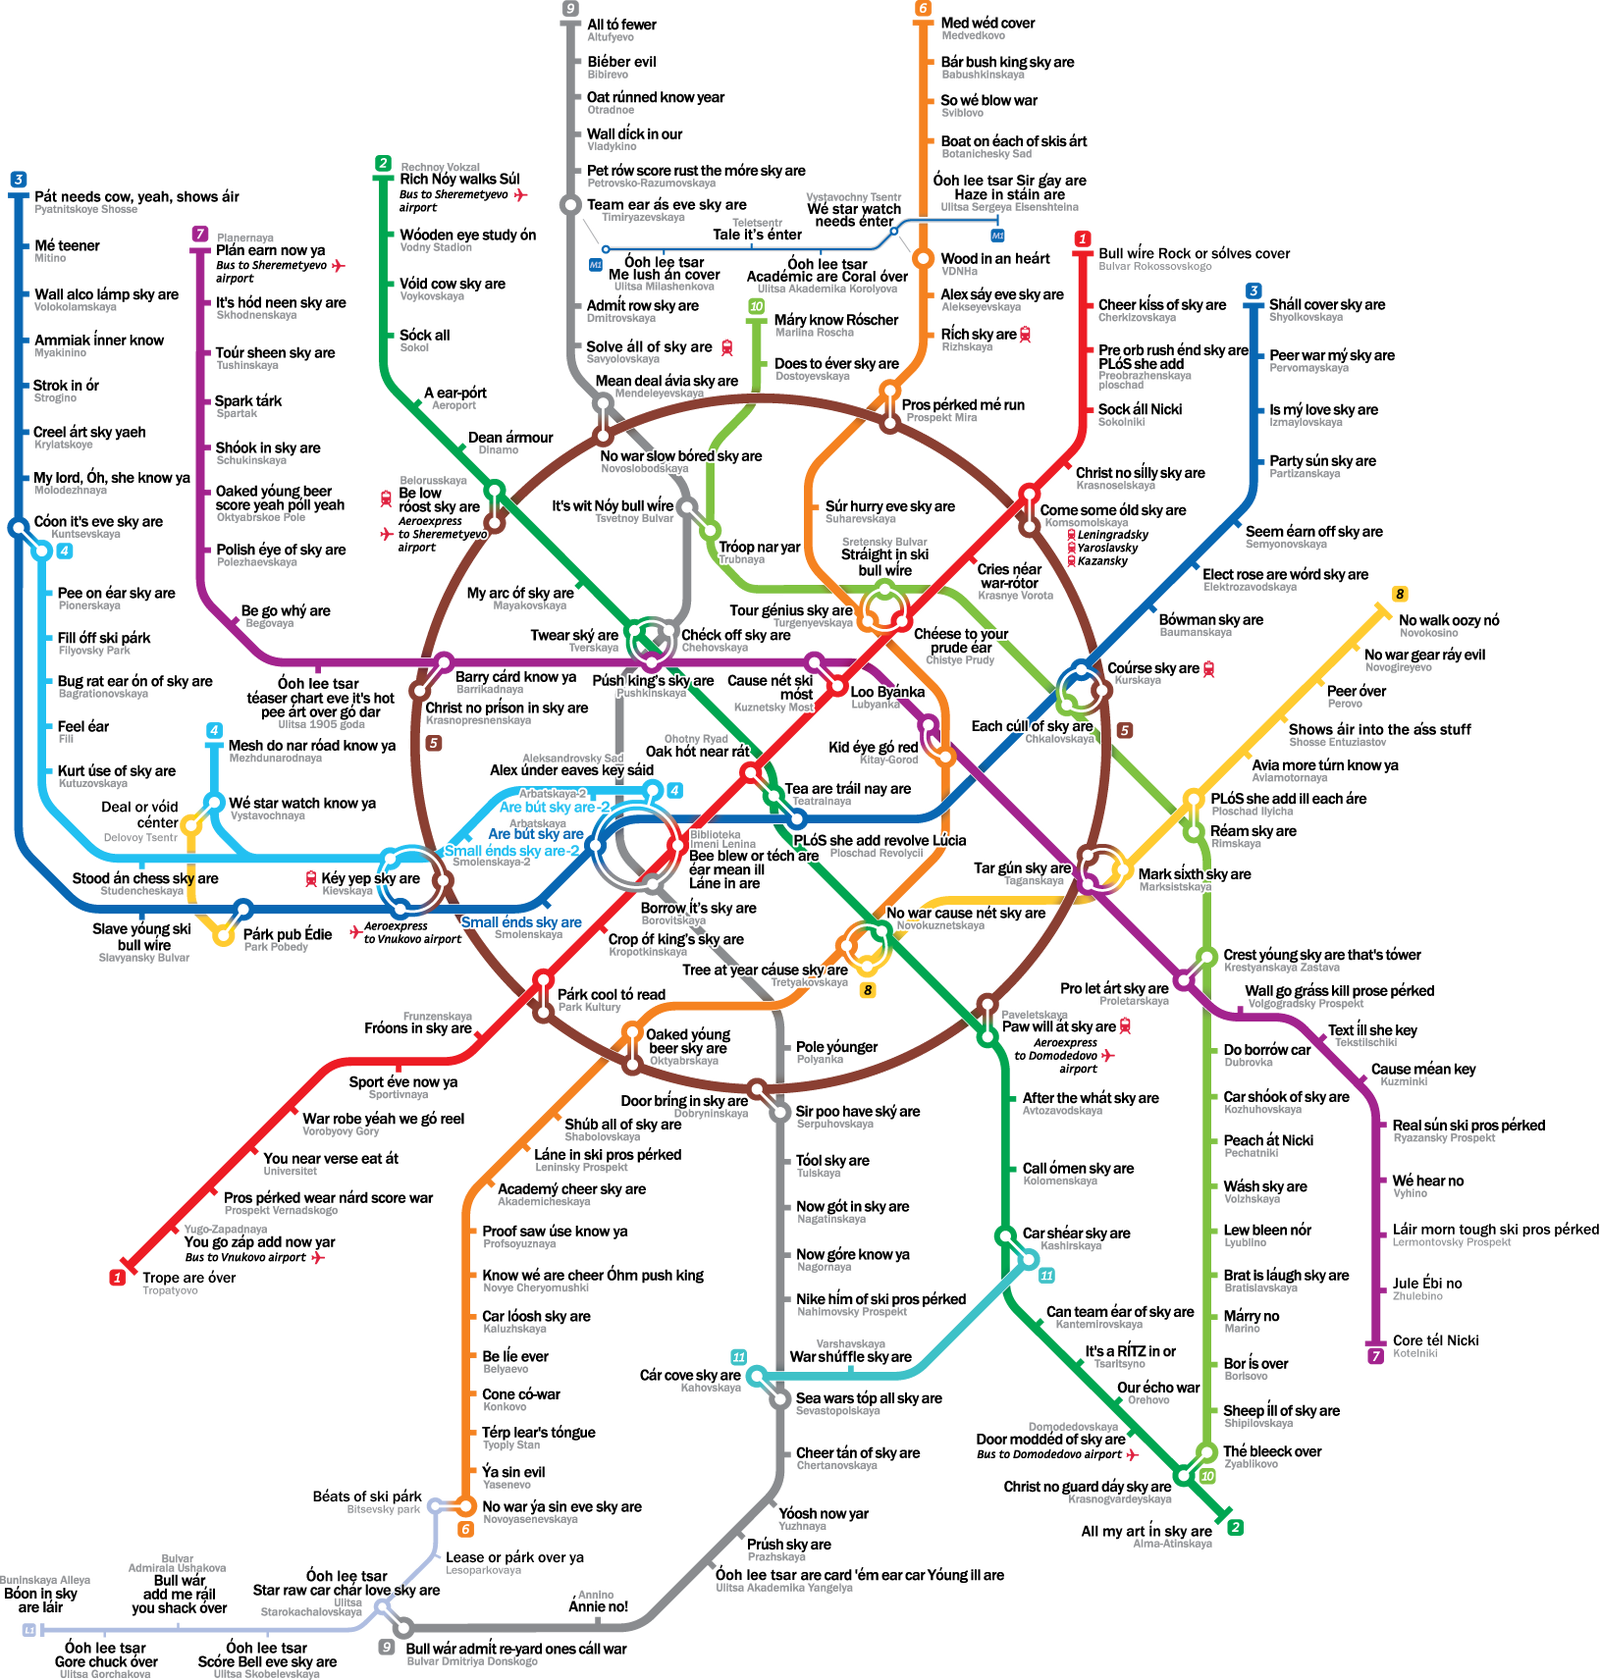 Tree at year cause sky are - Metro, Subway map, Moscow Metro